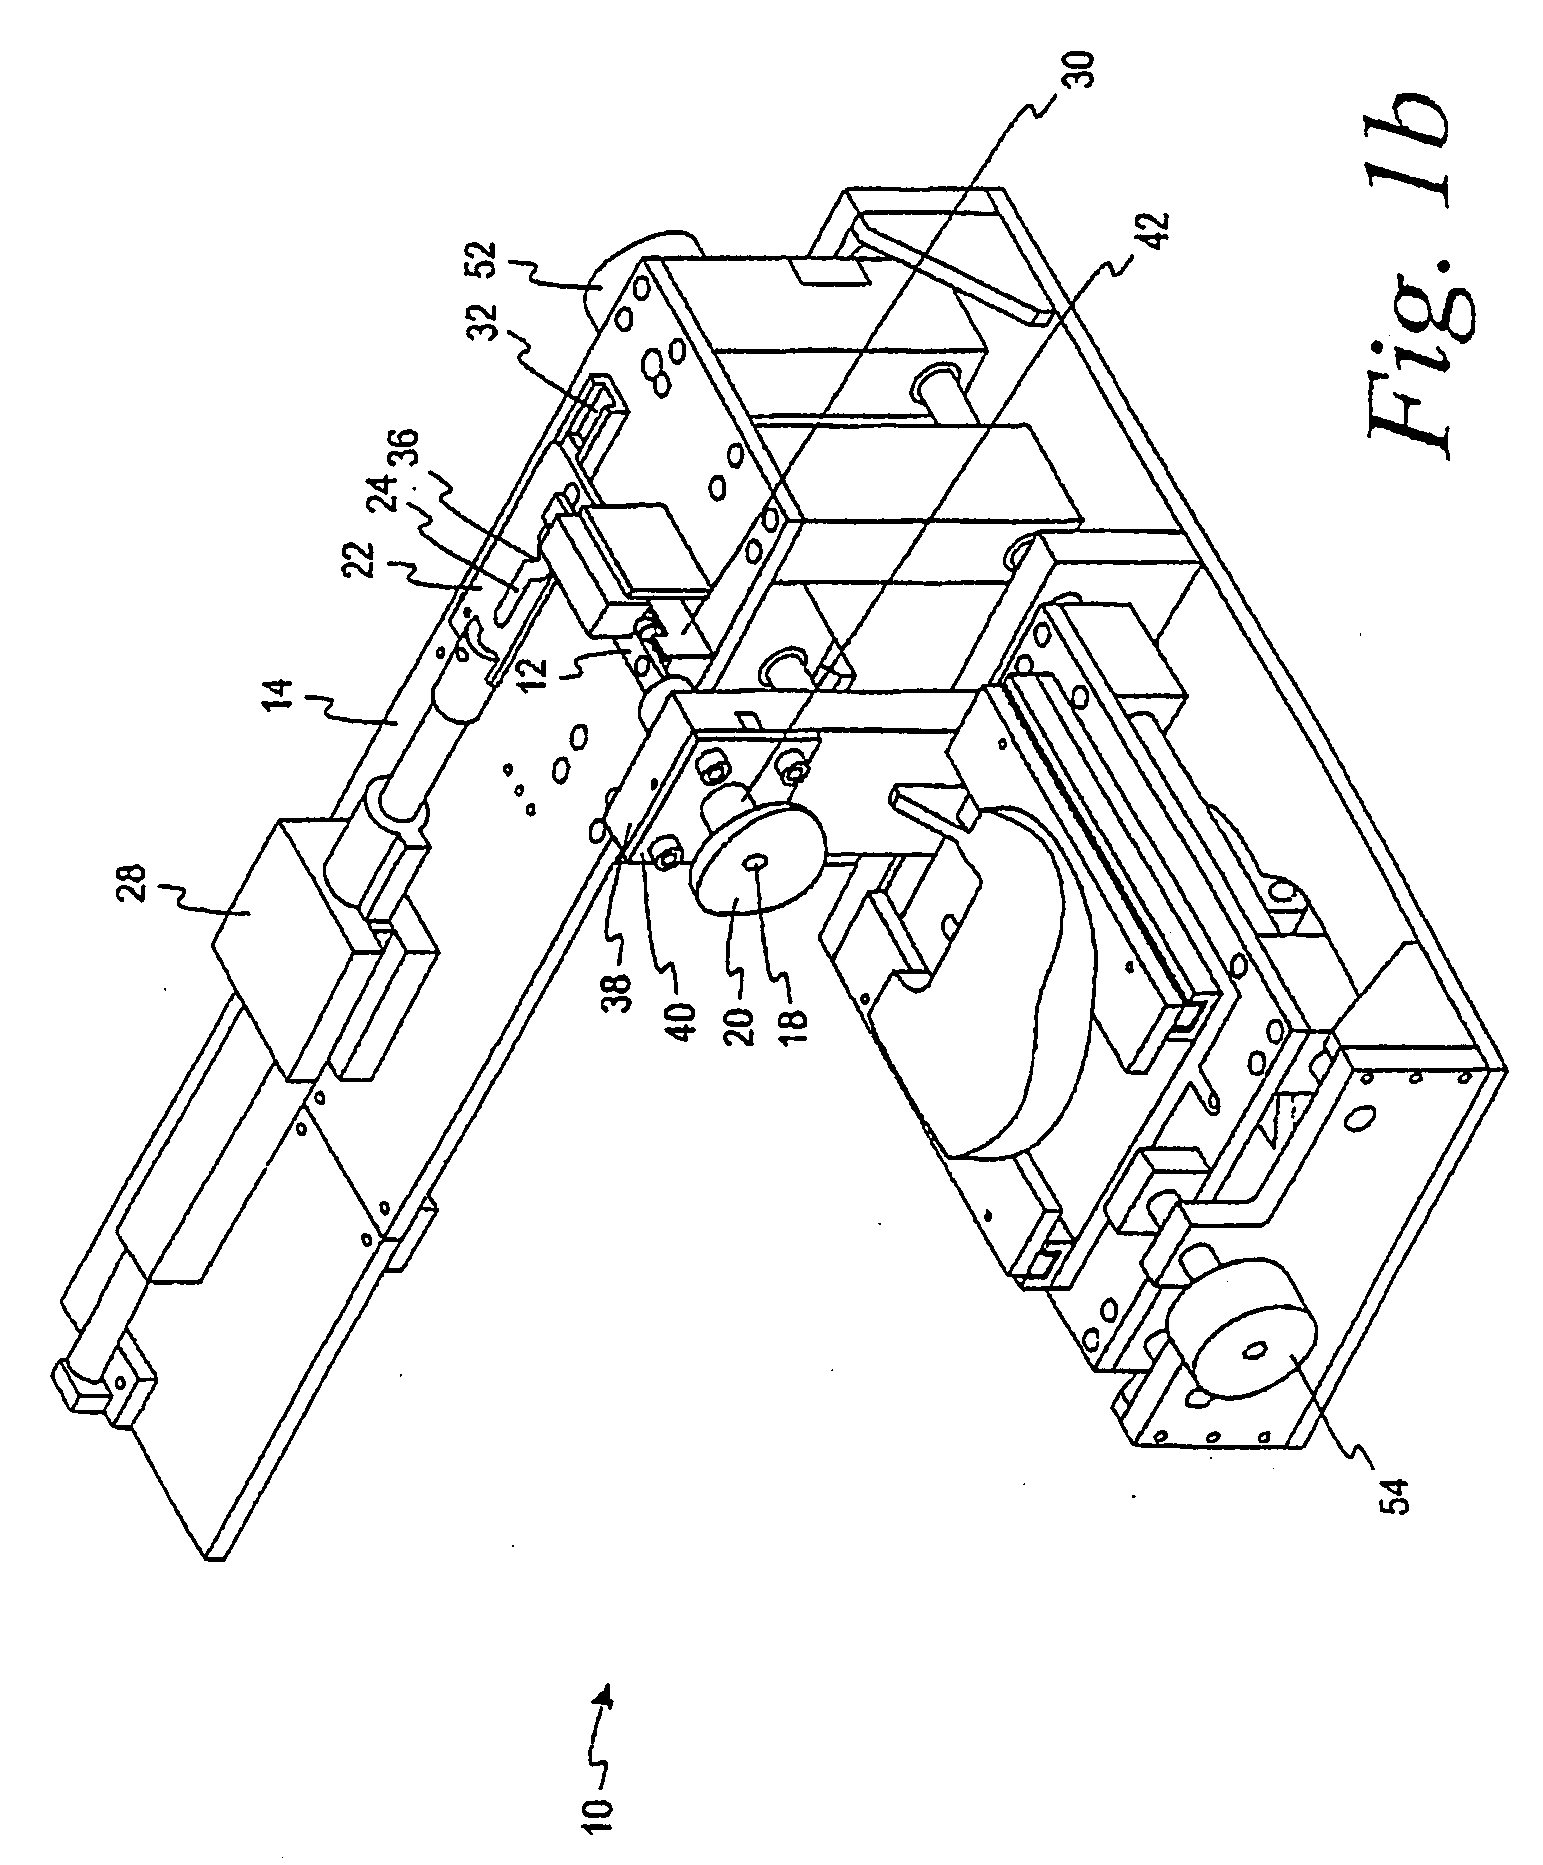 Single Puncture Lancing Fixture with Depth Adjustment and Control of Contact Force